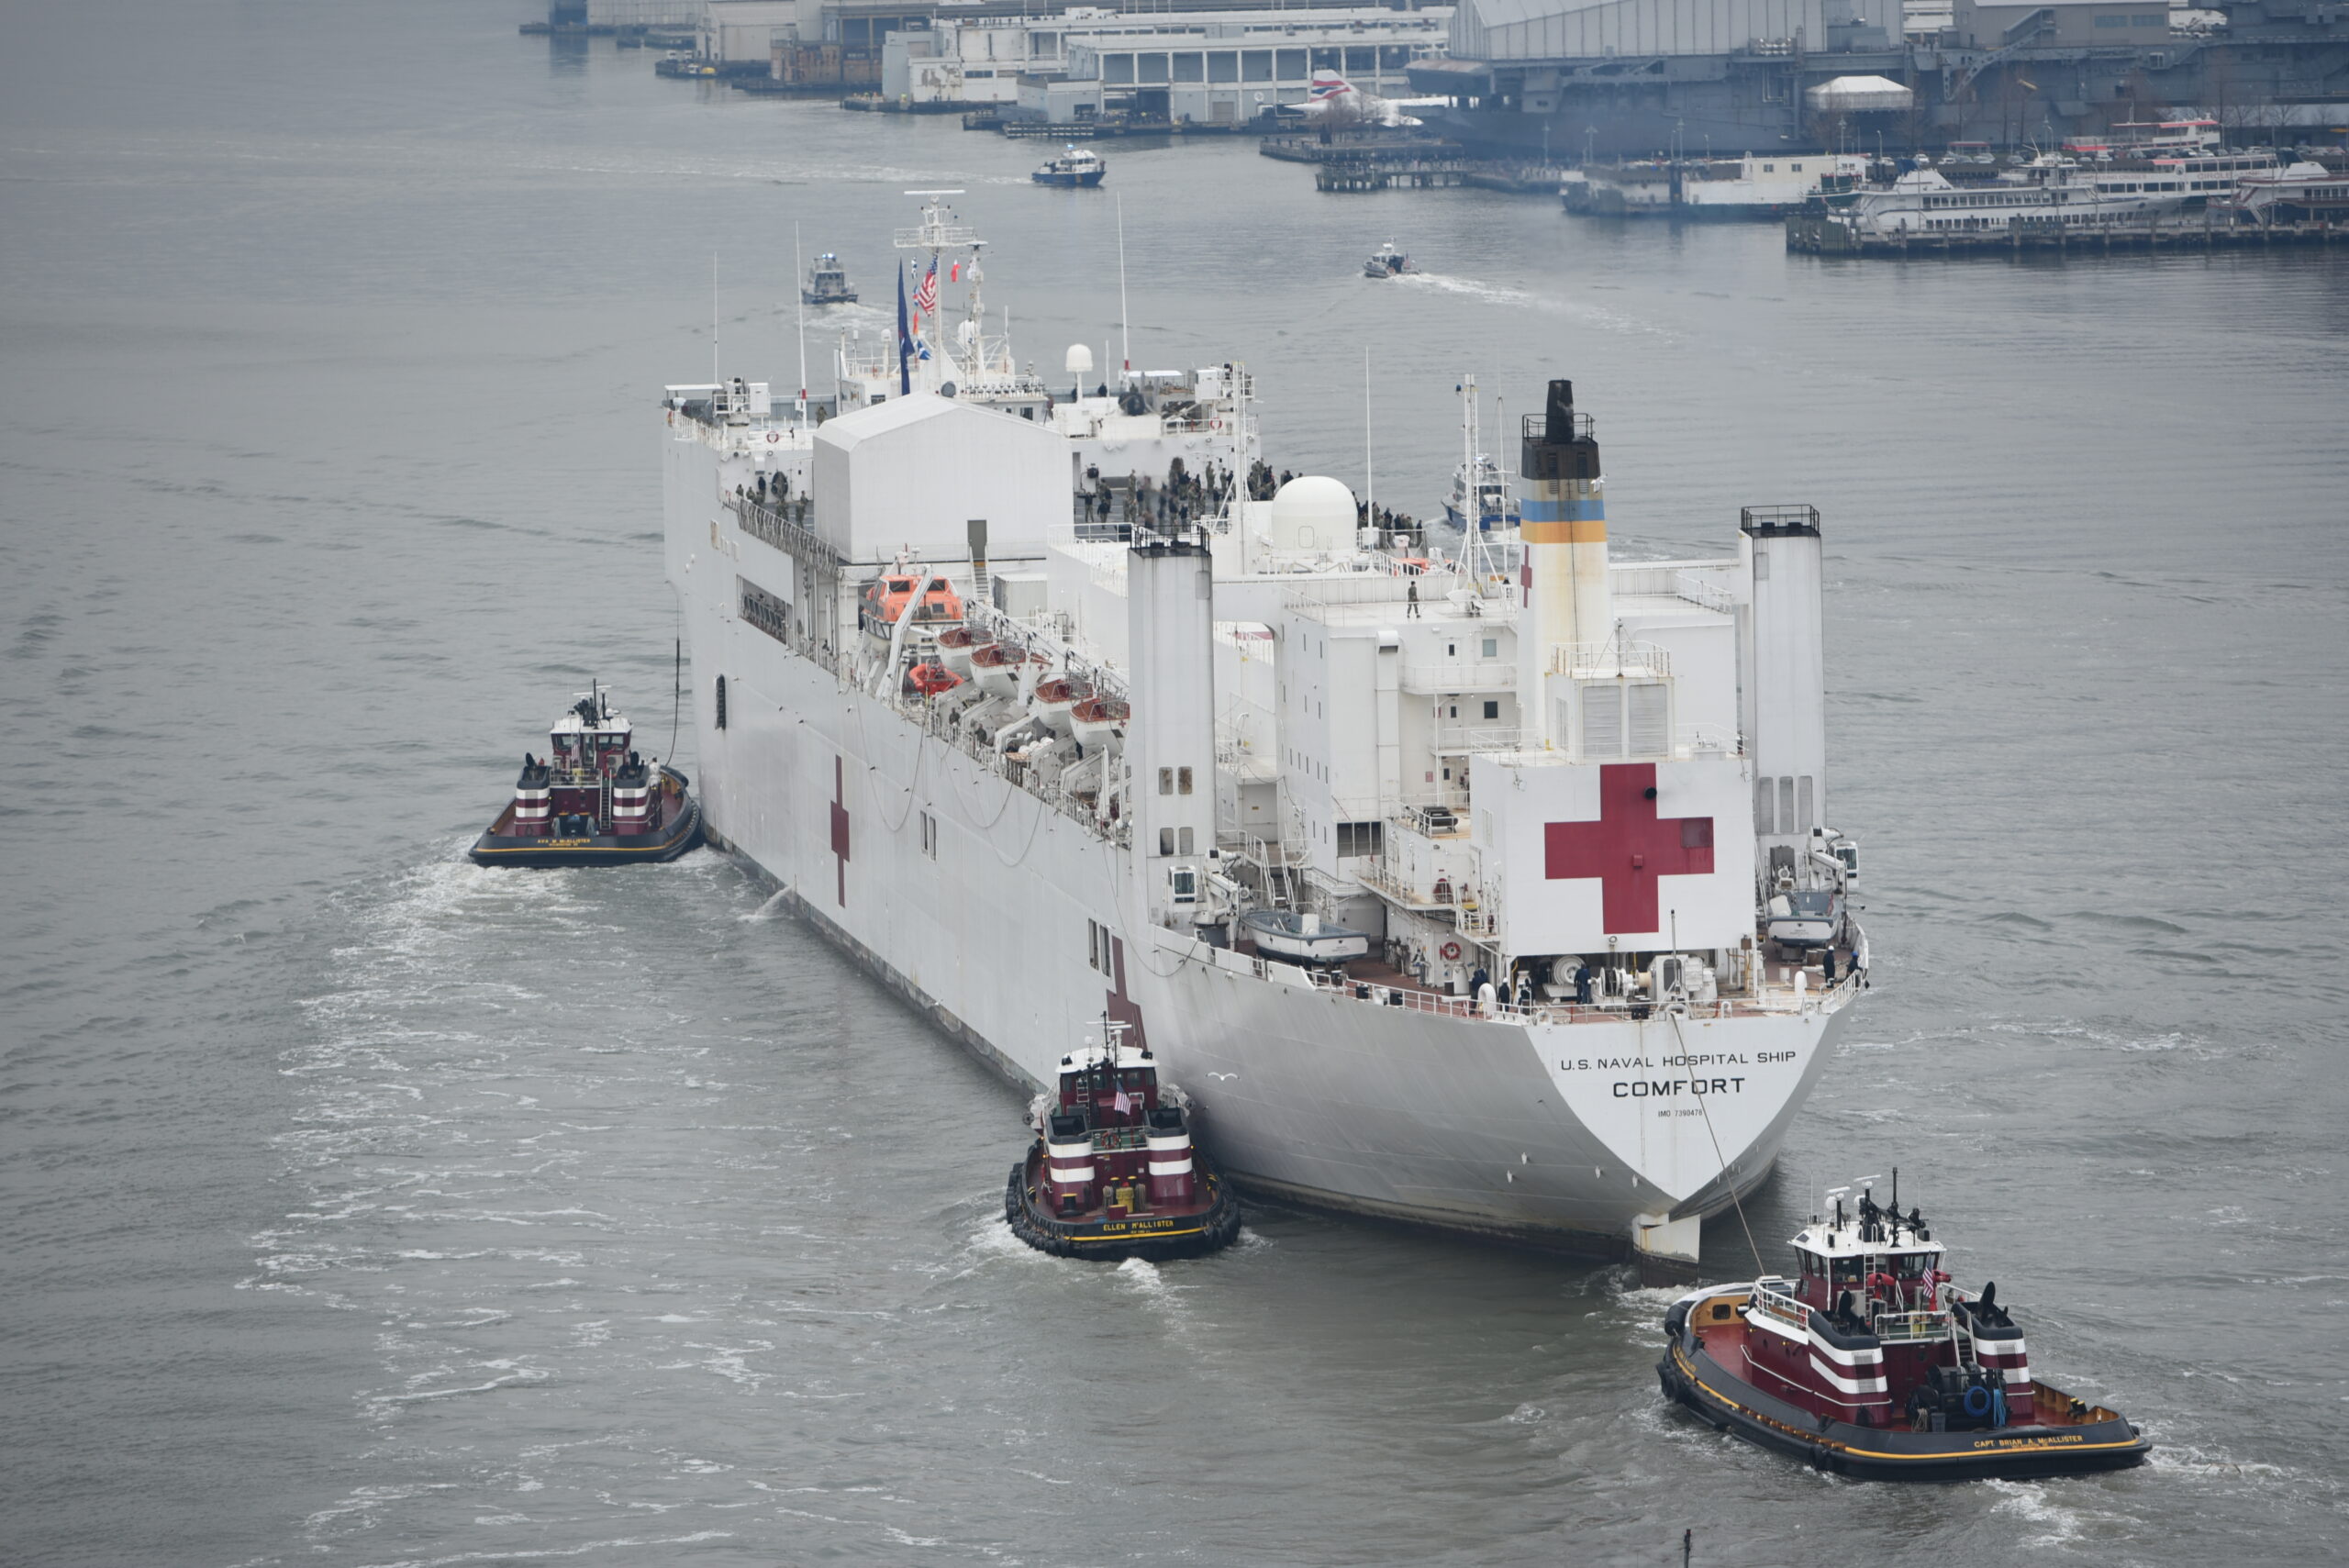 The huge Navy hospital ships in Los Angeles and New York have a rich history